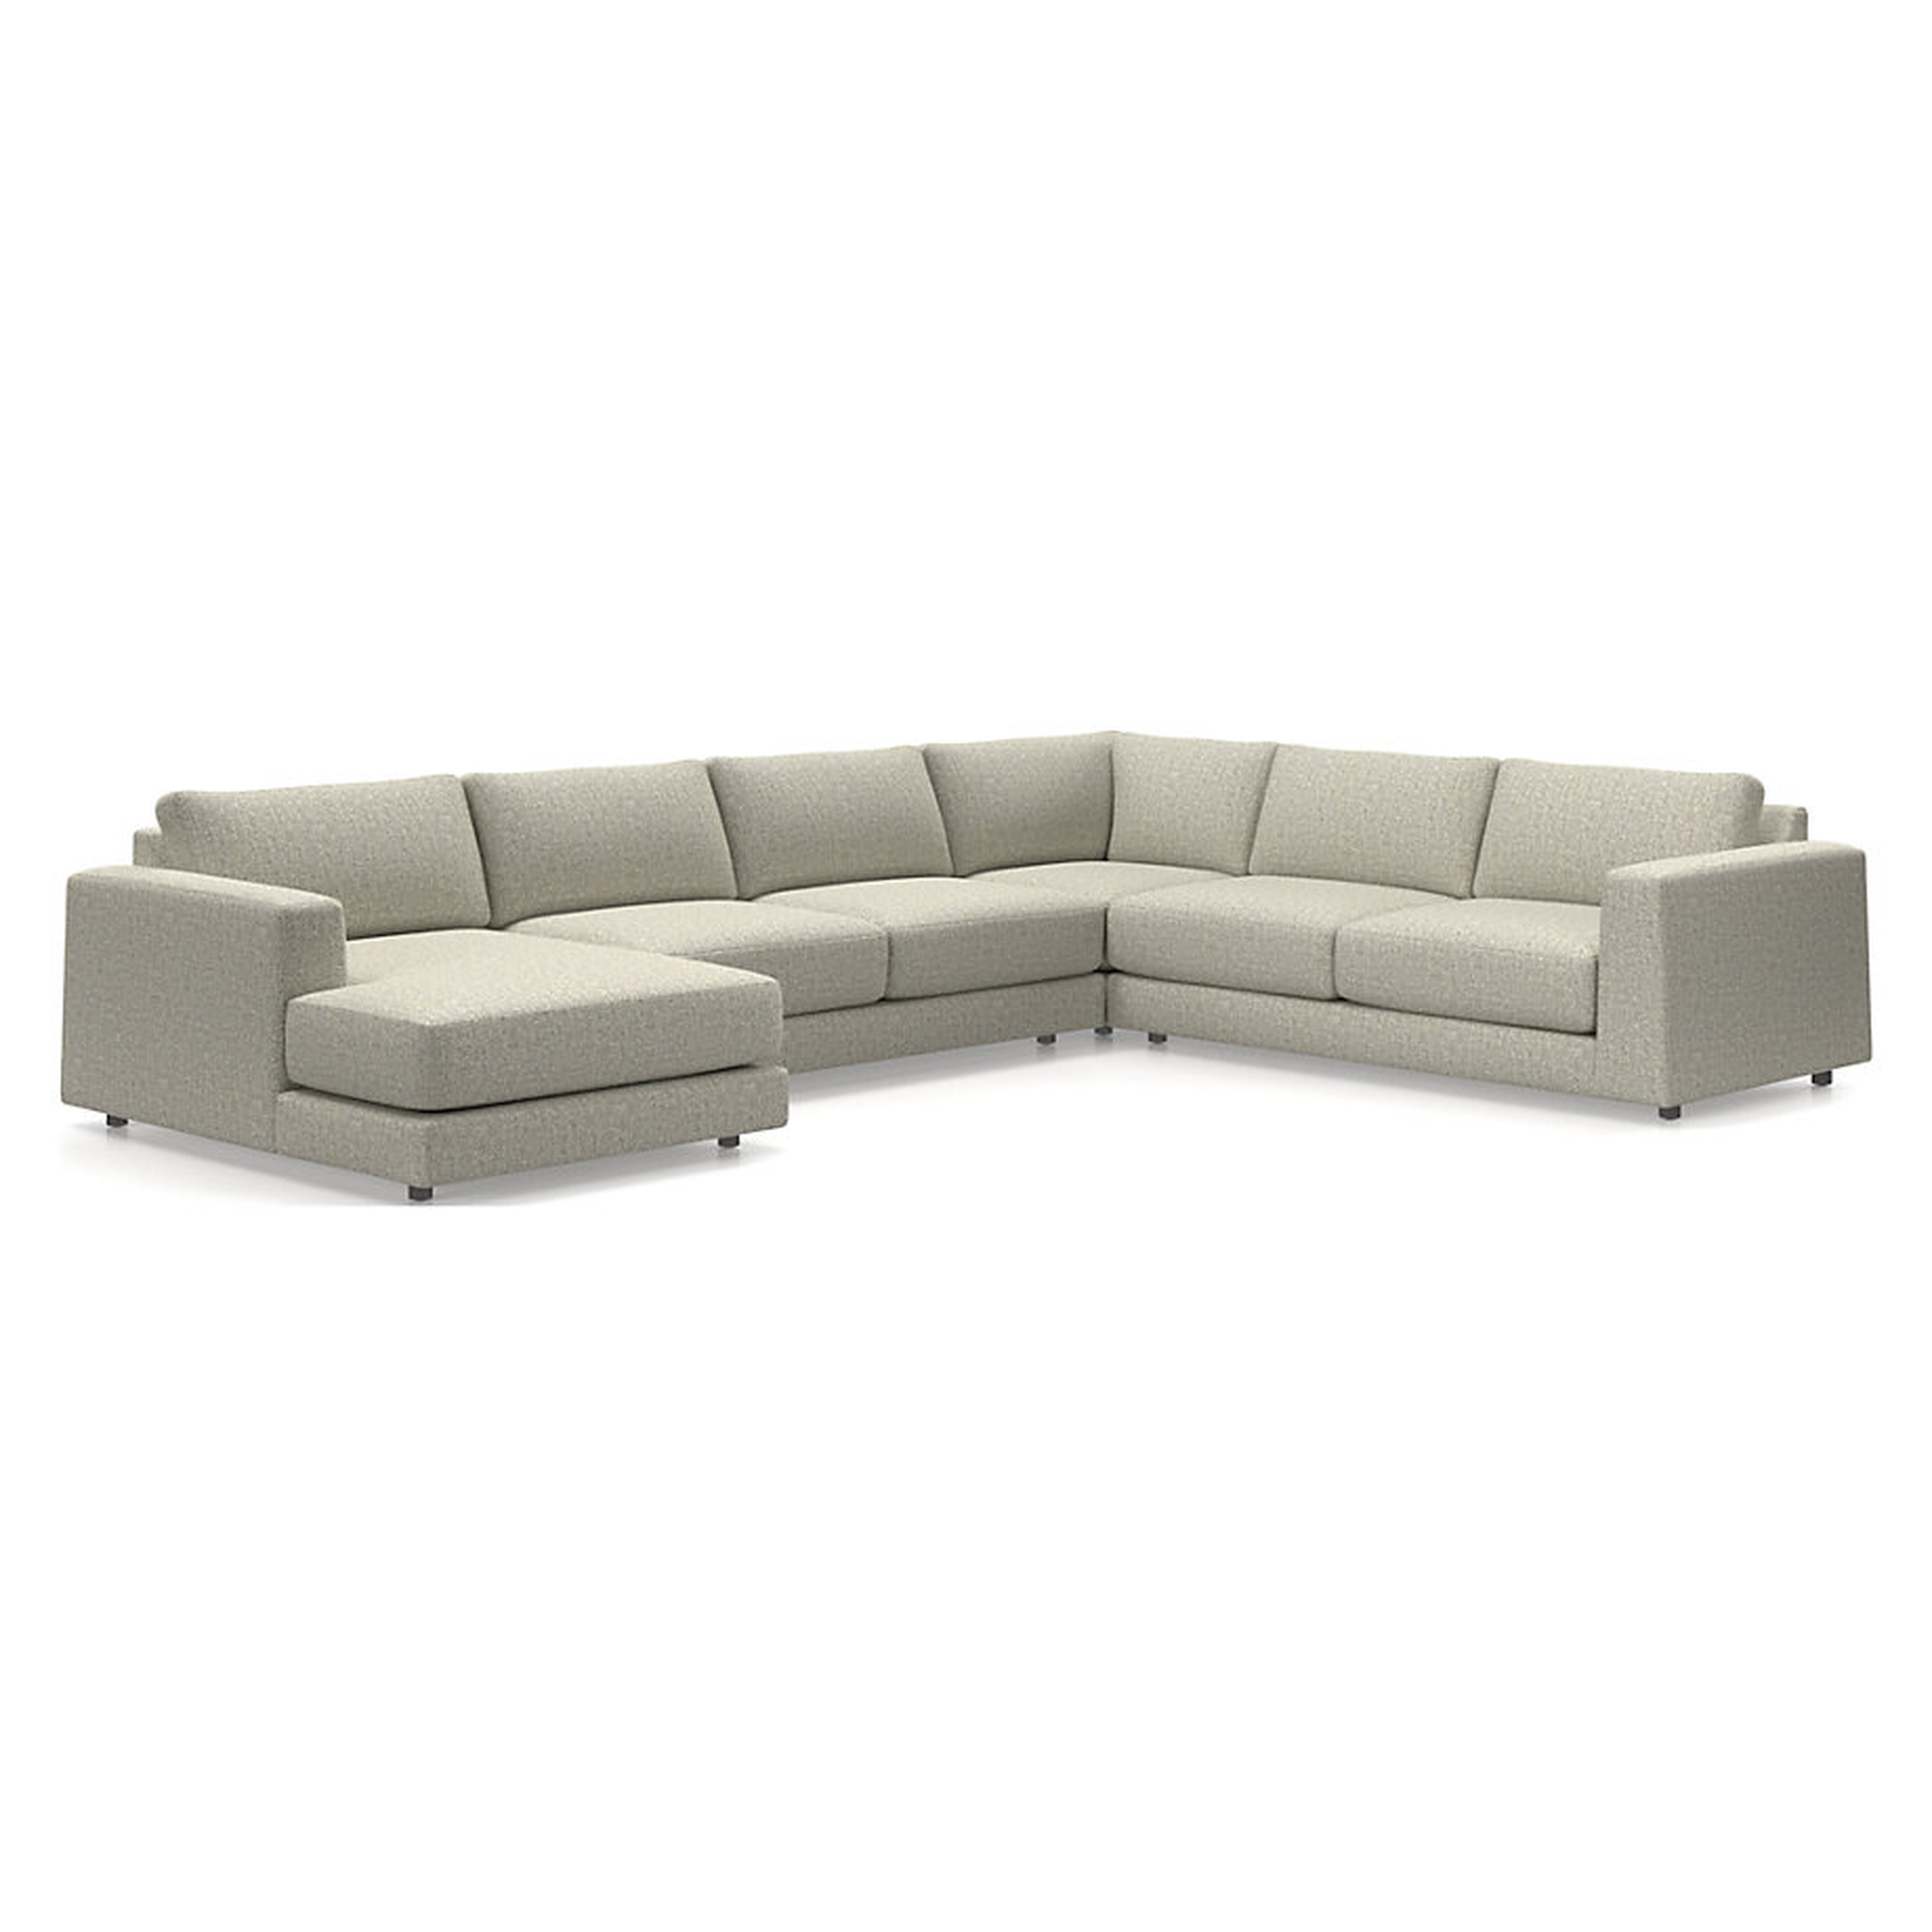 Peyton 4-Piece Left Arm Chaise Sectiona - Crate and Barrel